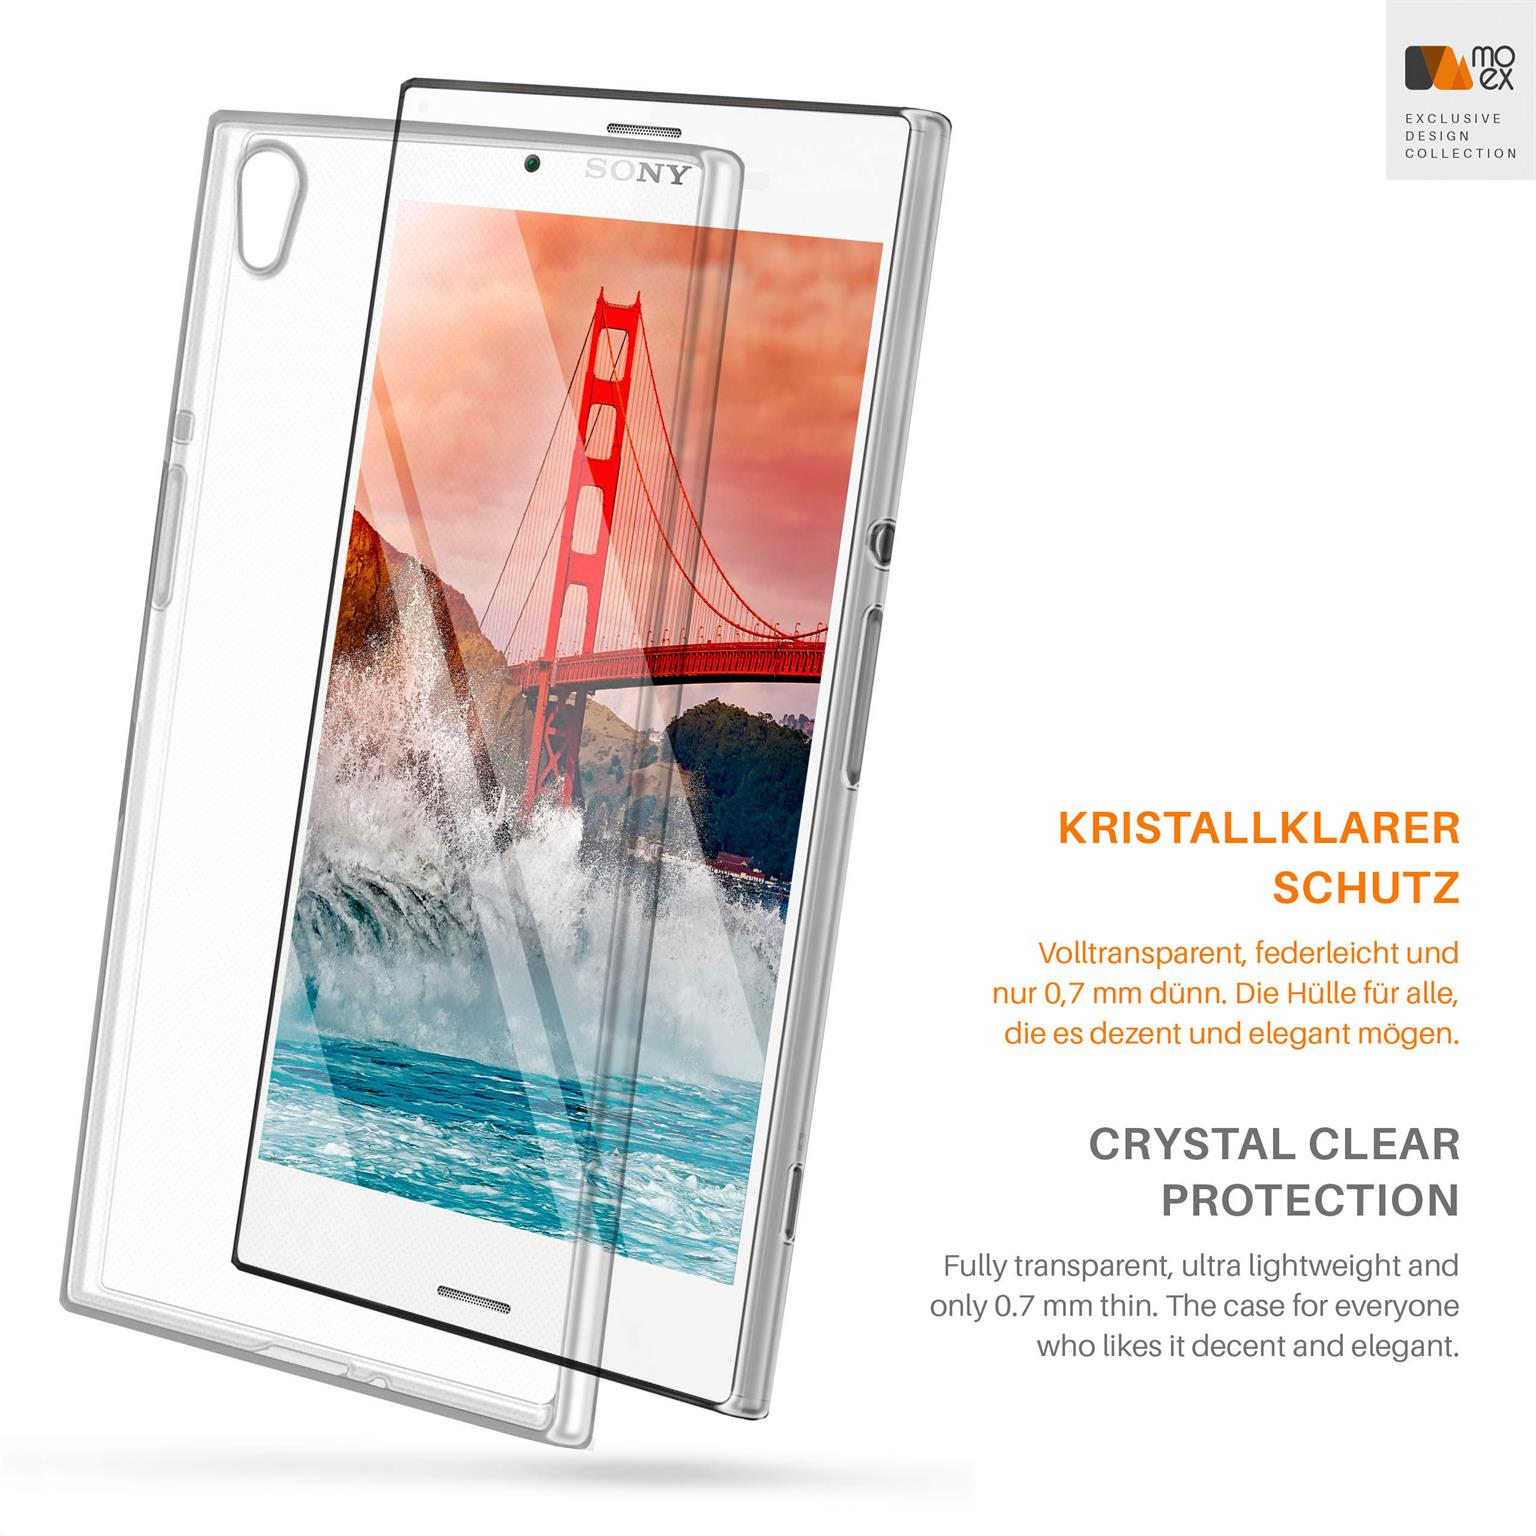 MOEX Aero Plus, Z3 Xperia Crystal-Clear Backcover, Case, Sony